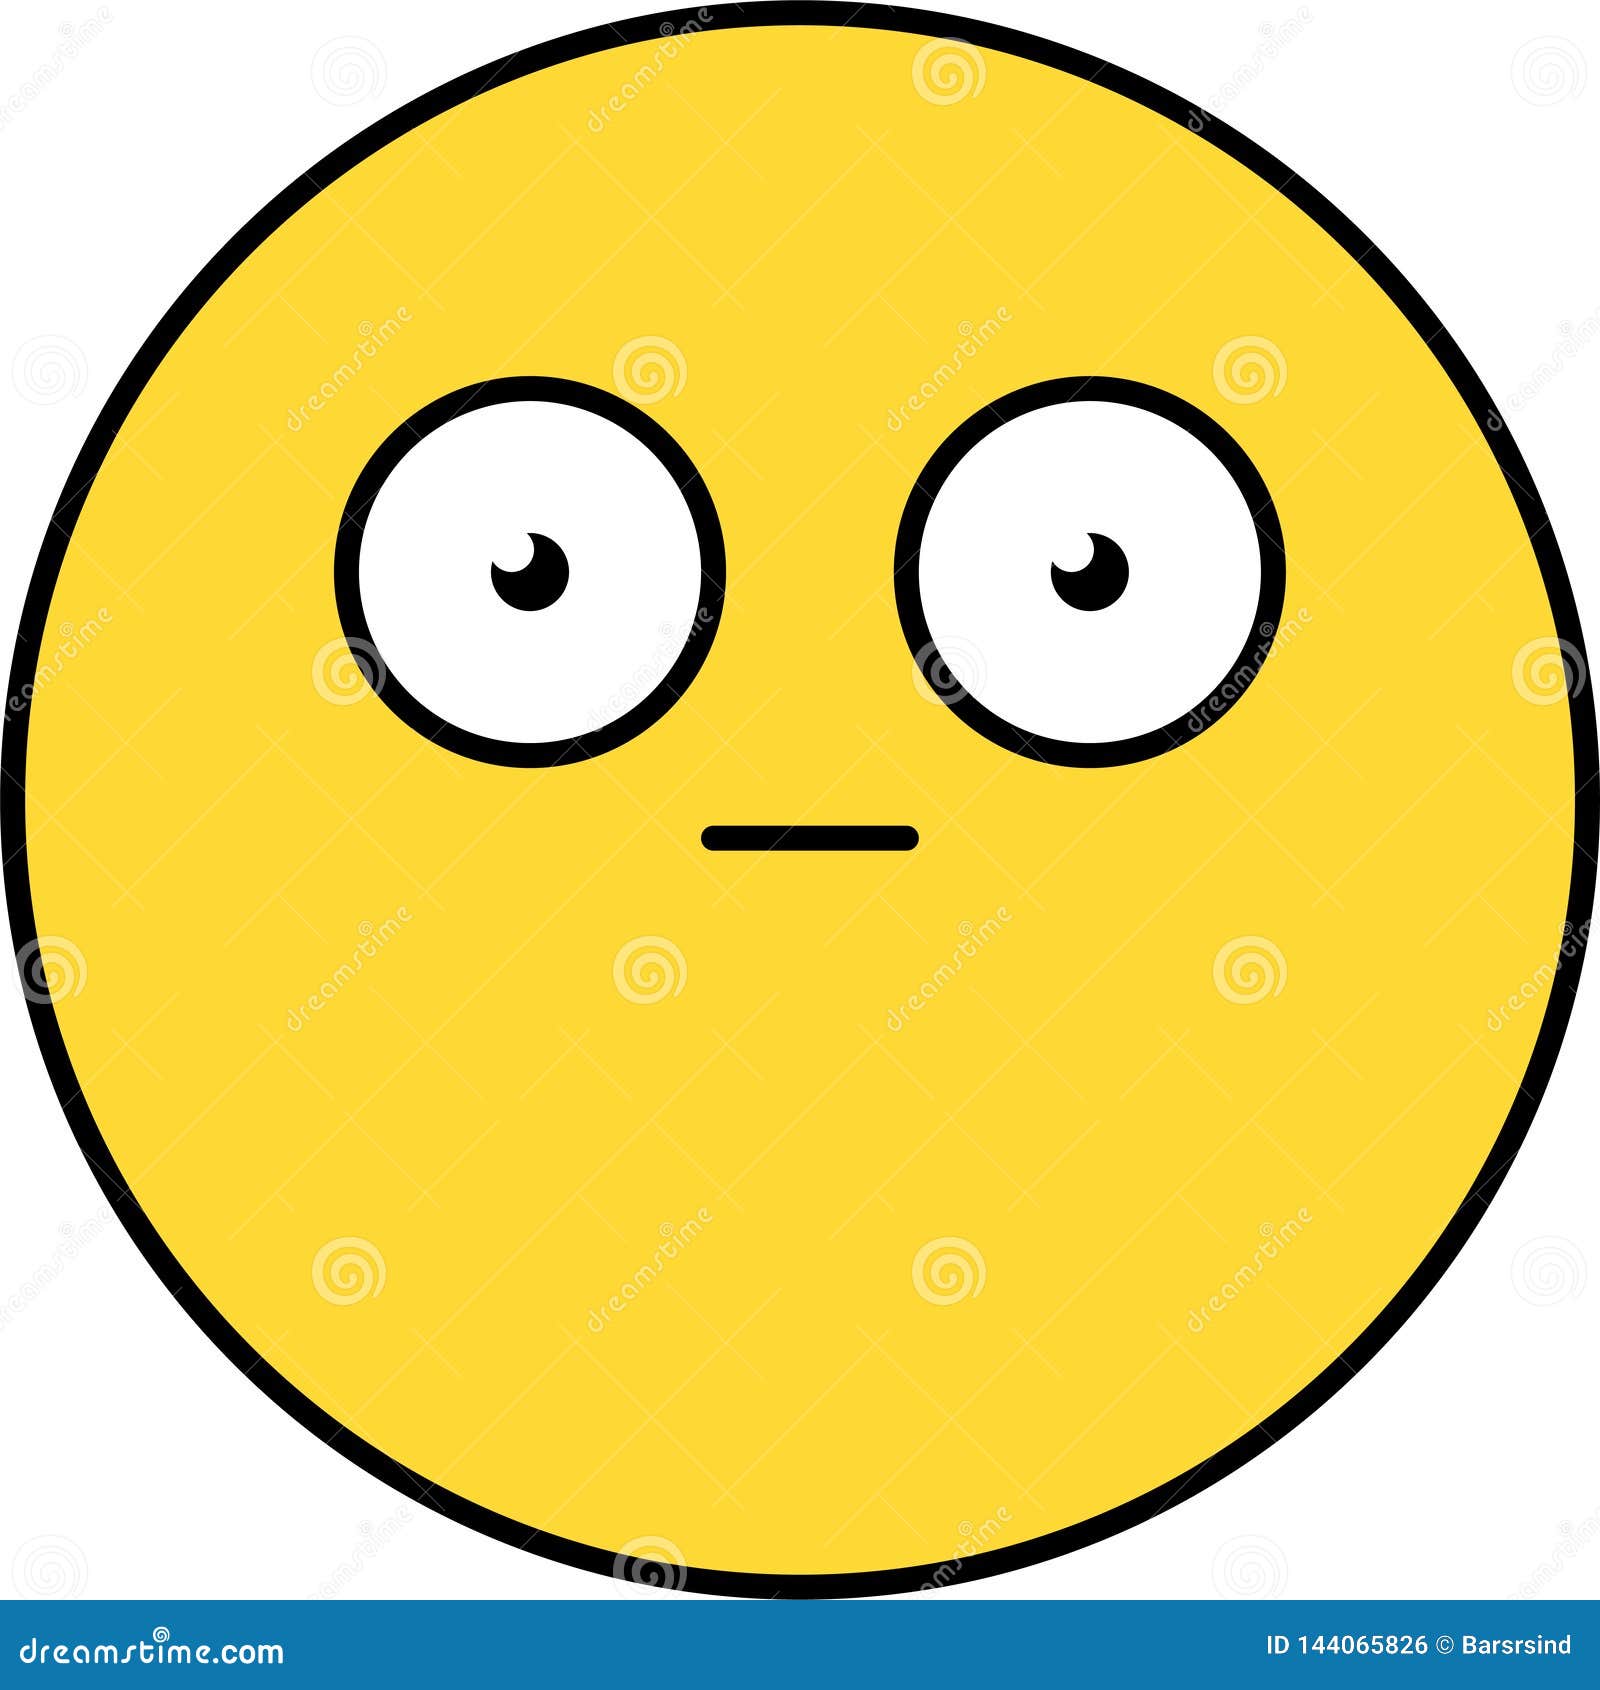 Cartoon face vector frightened emoji fear or worry - Stock